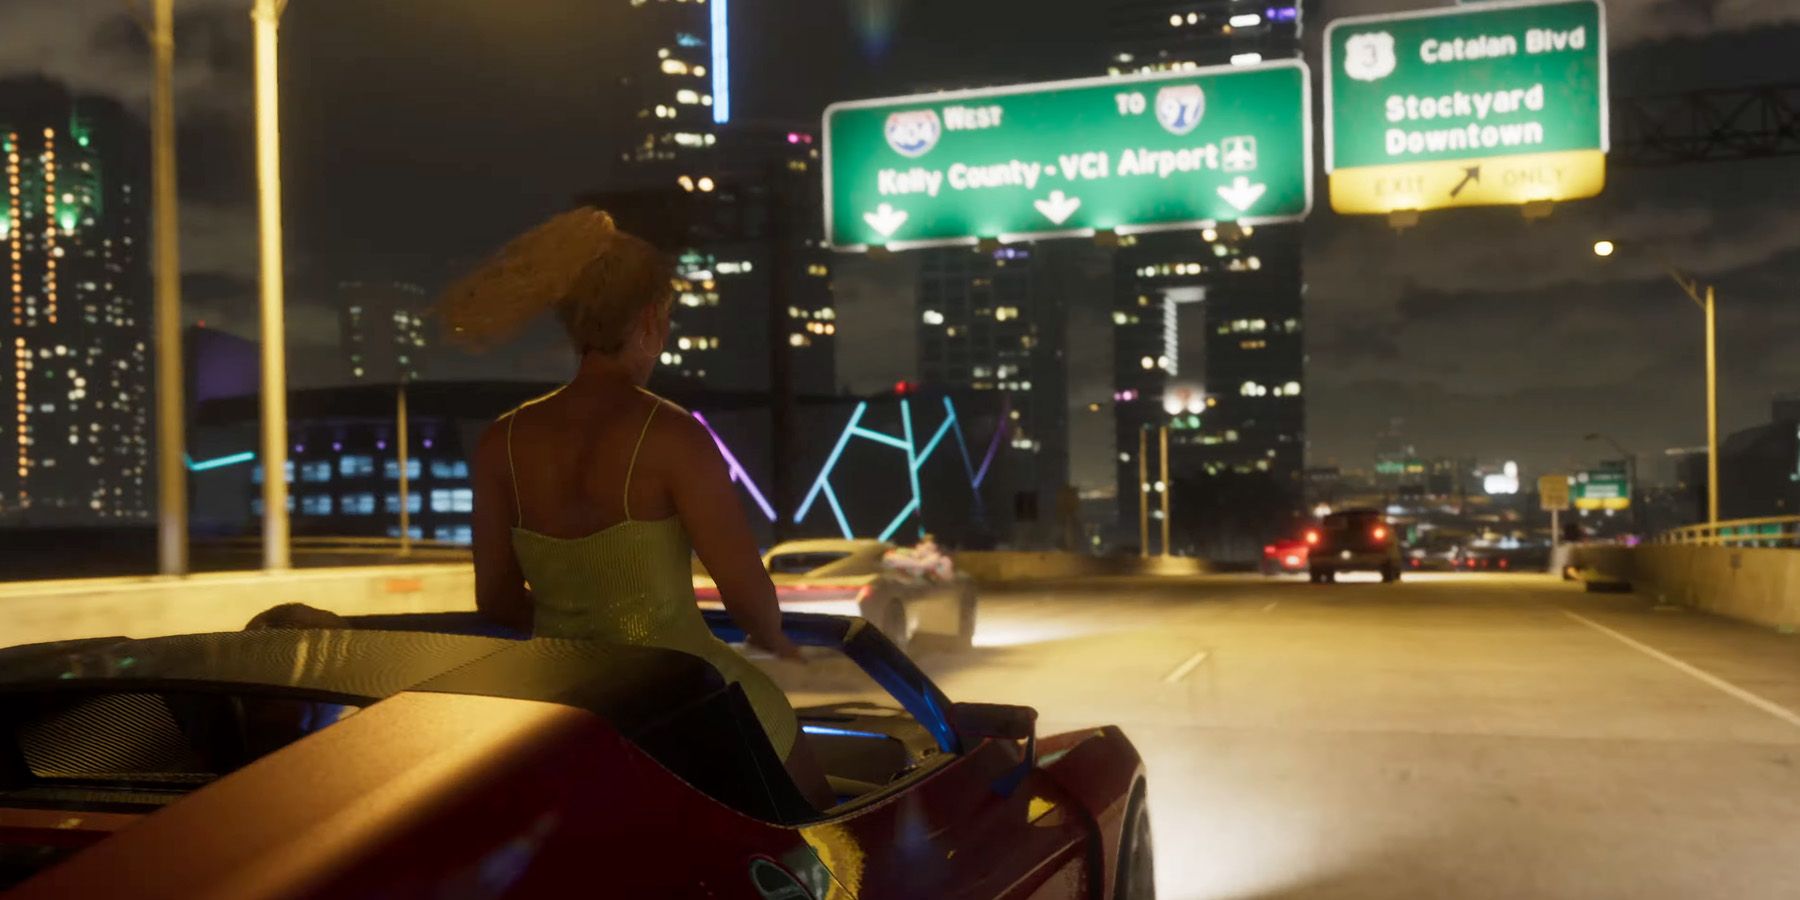 A road sign indicating the existence of a Catalan Boulevard in GTA 6.